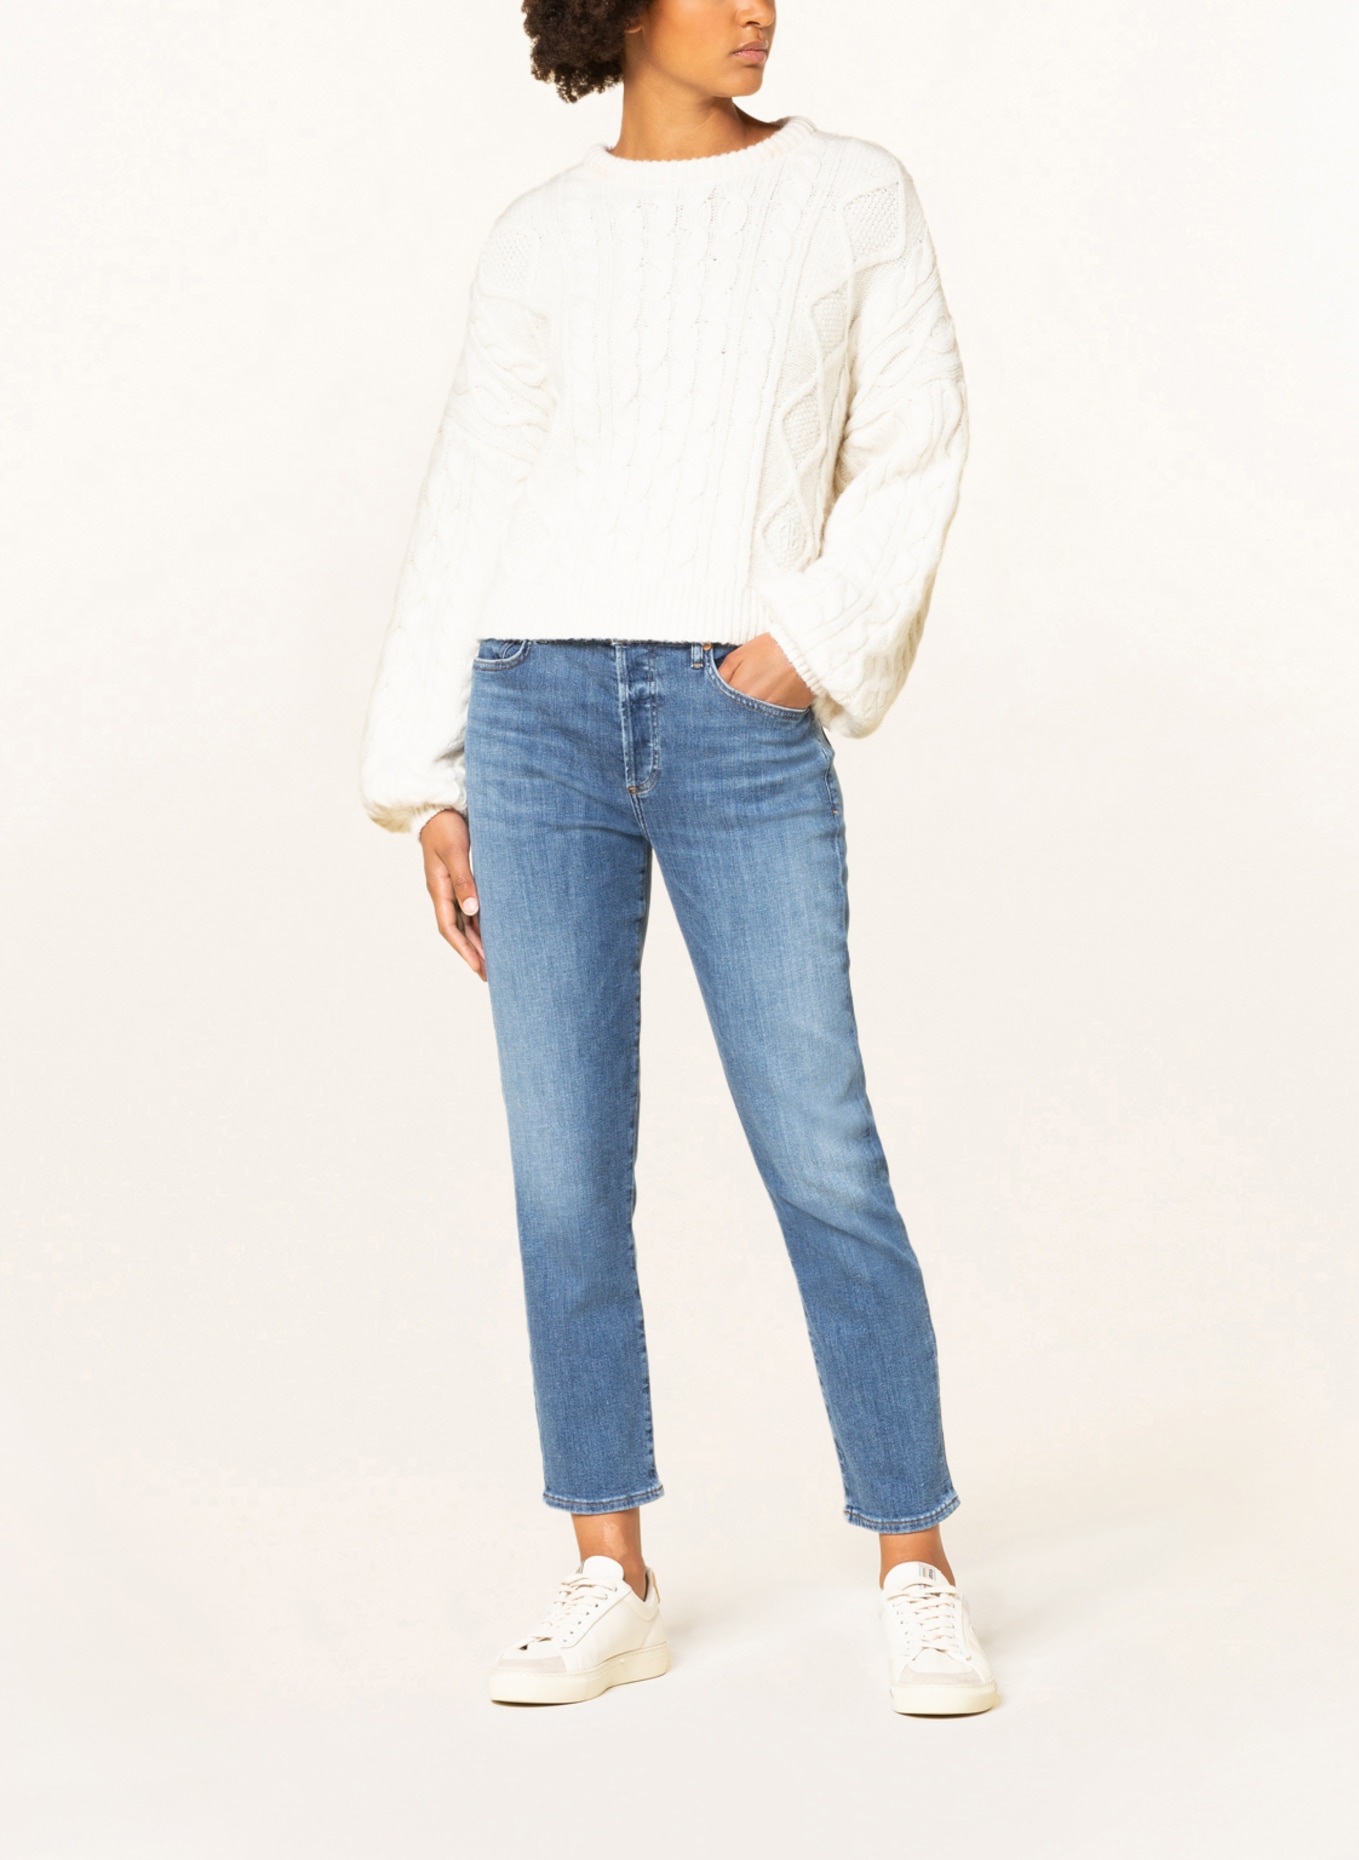 CITIZENS of HUMANITY Boyfriend jeans EMERSON, Color: Lawless md vint indigo (Image 2)